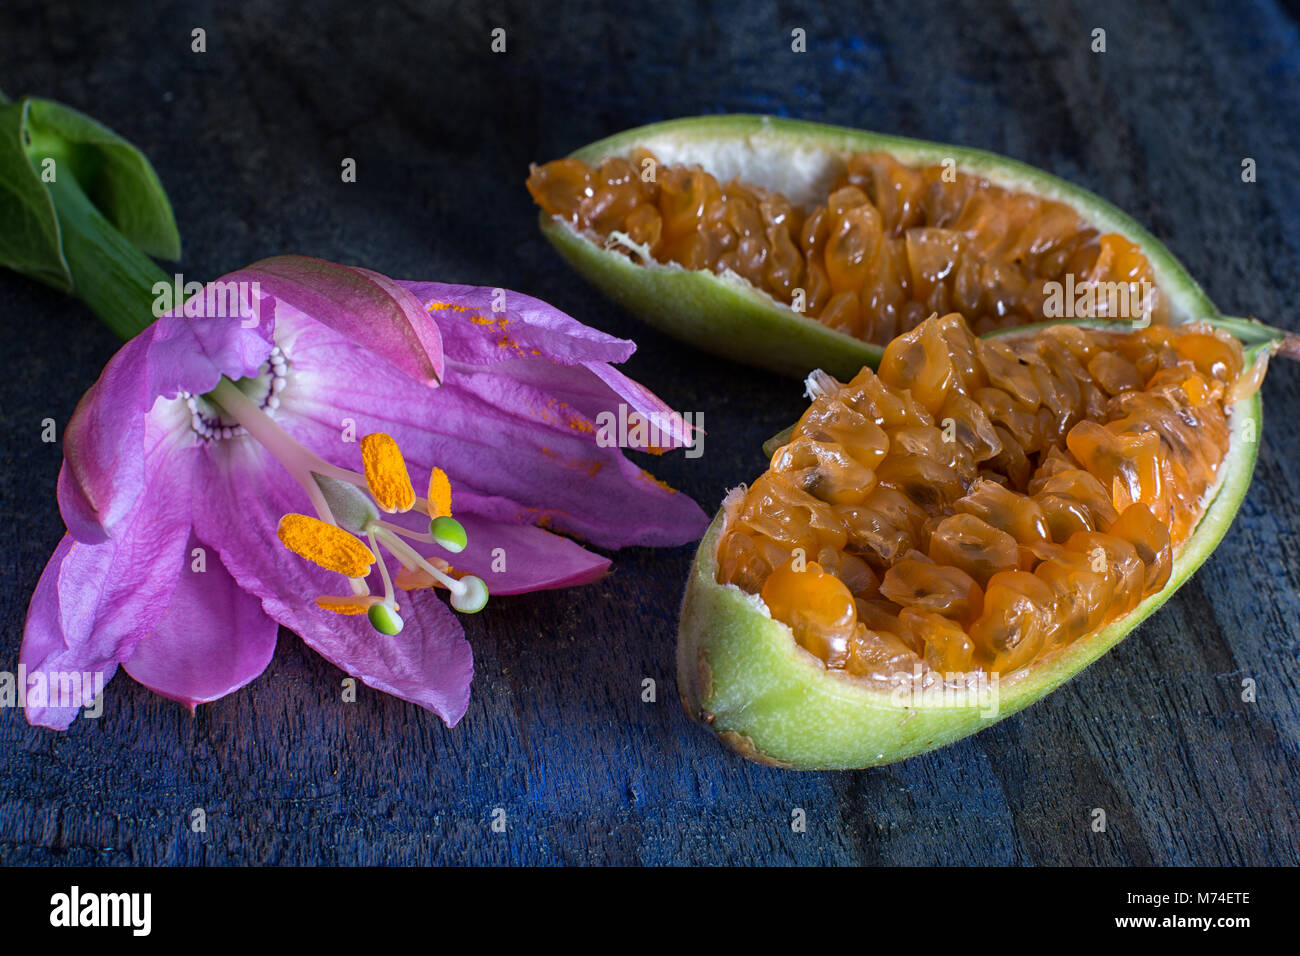 cut passion fruit and flower also known as taxo Stock Photo